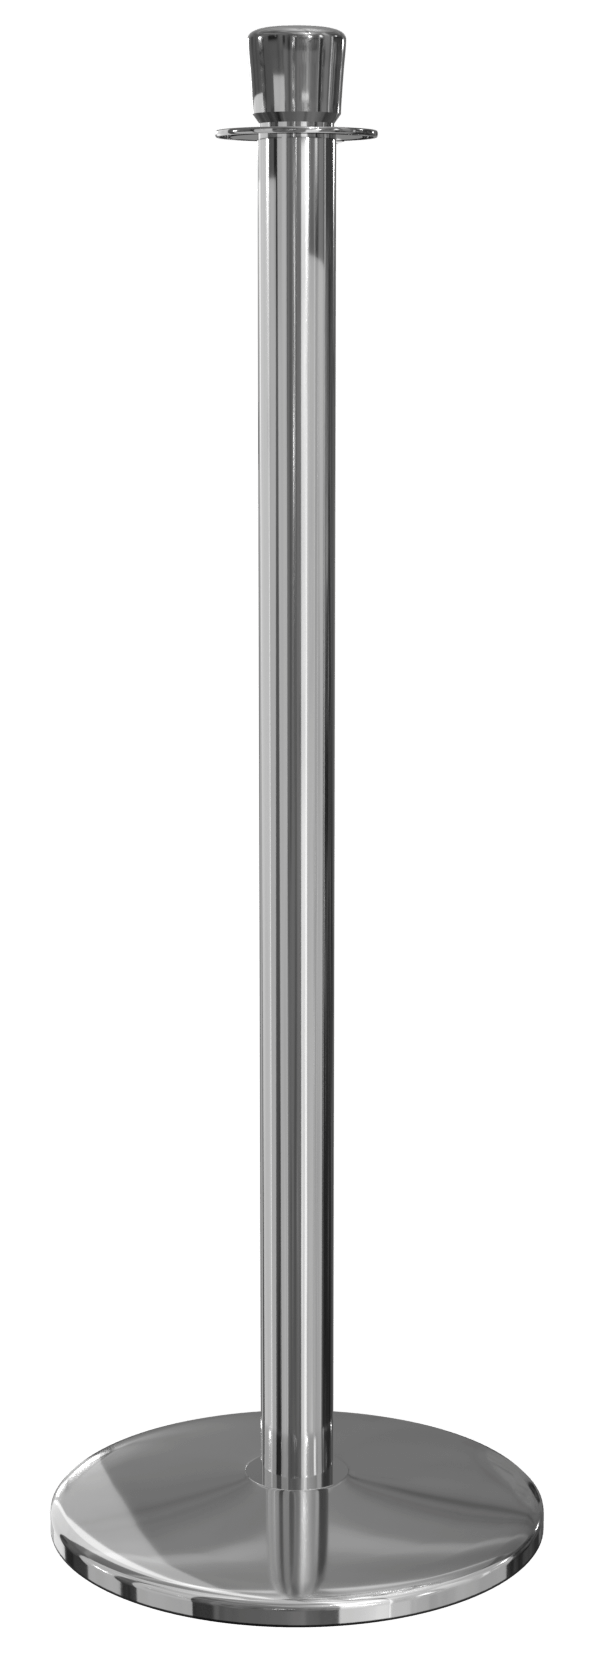 Leader Crown Rope Barrier Post in Polished Stainless